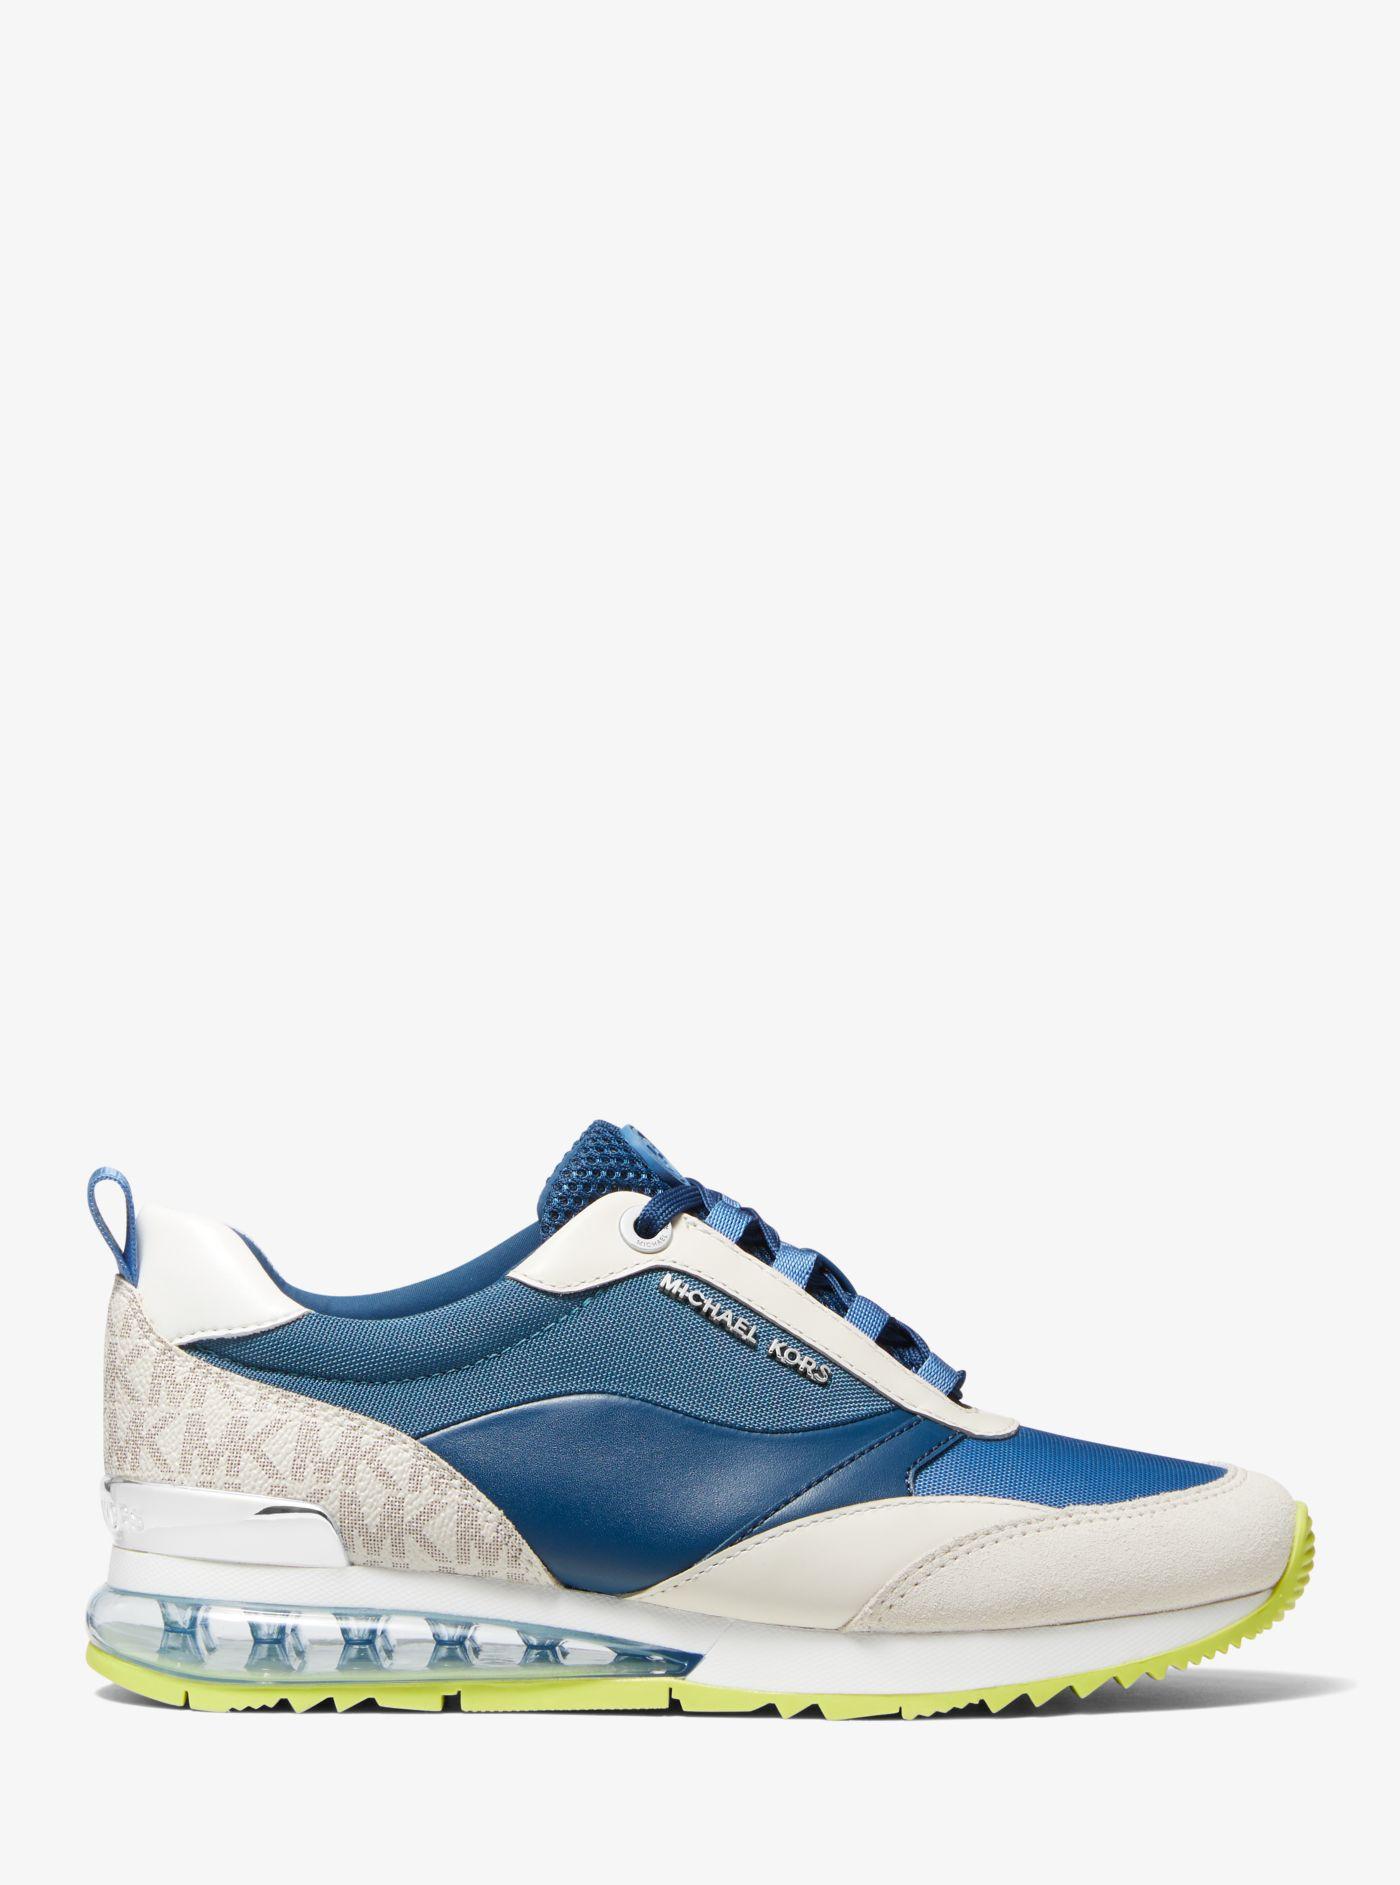 Michael Kors Allie Stride Extreme Mixed-media Trainer in Blue | Lyst